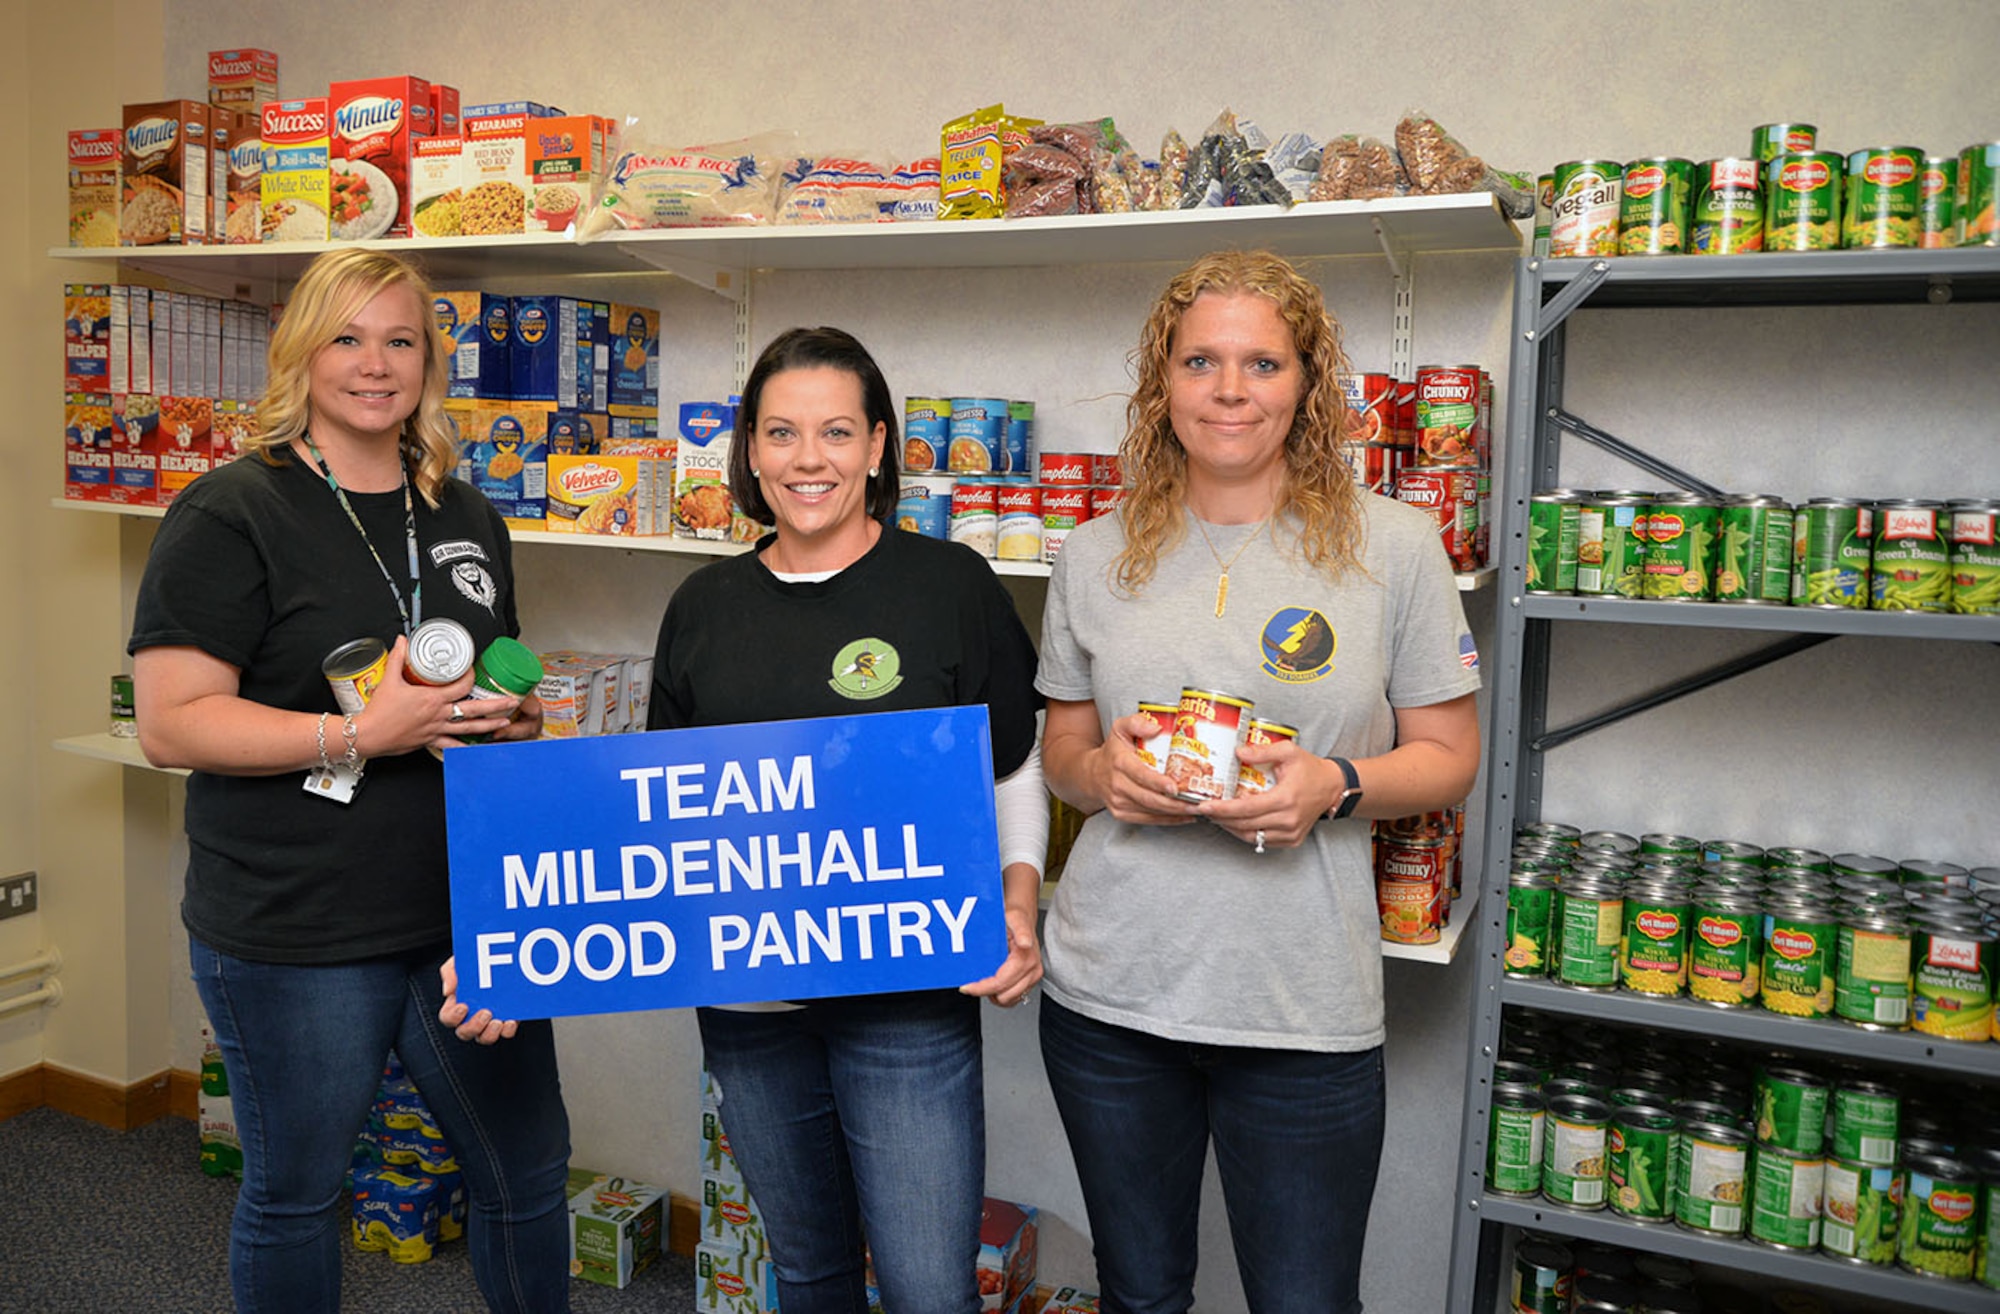 team-mildenhall-food-pantry-to-help-airmen-in-need-royal-air-force